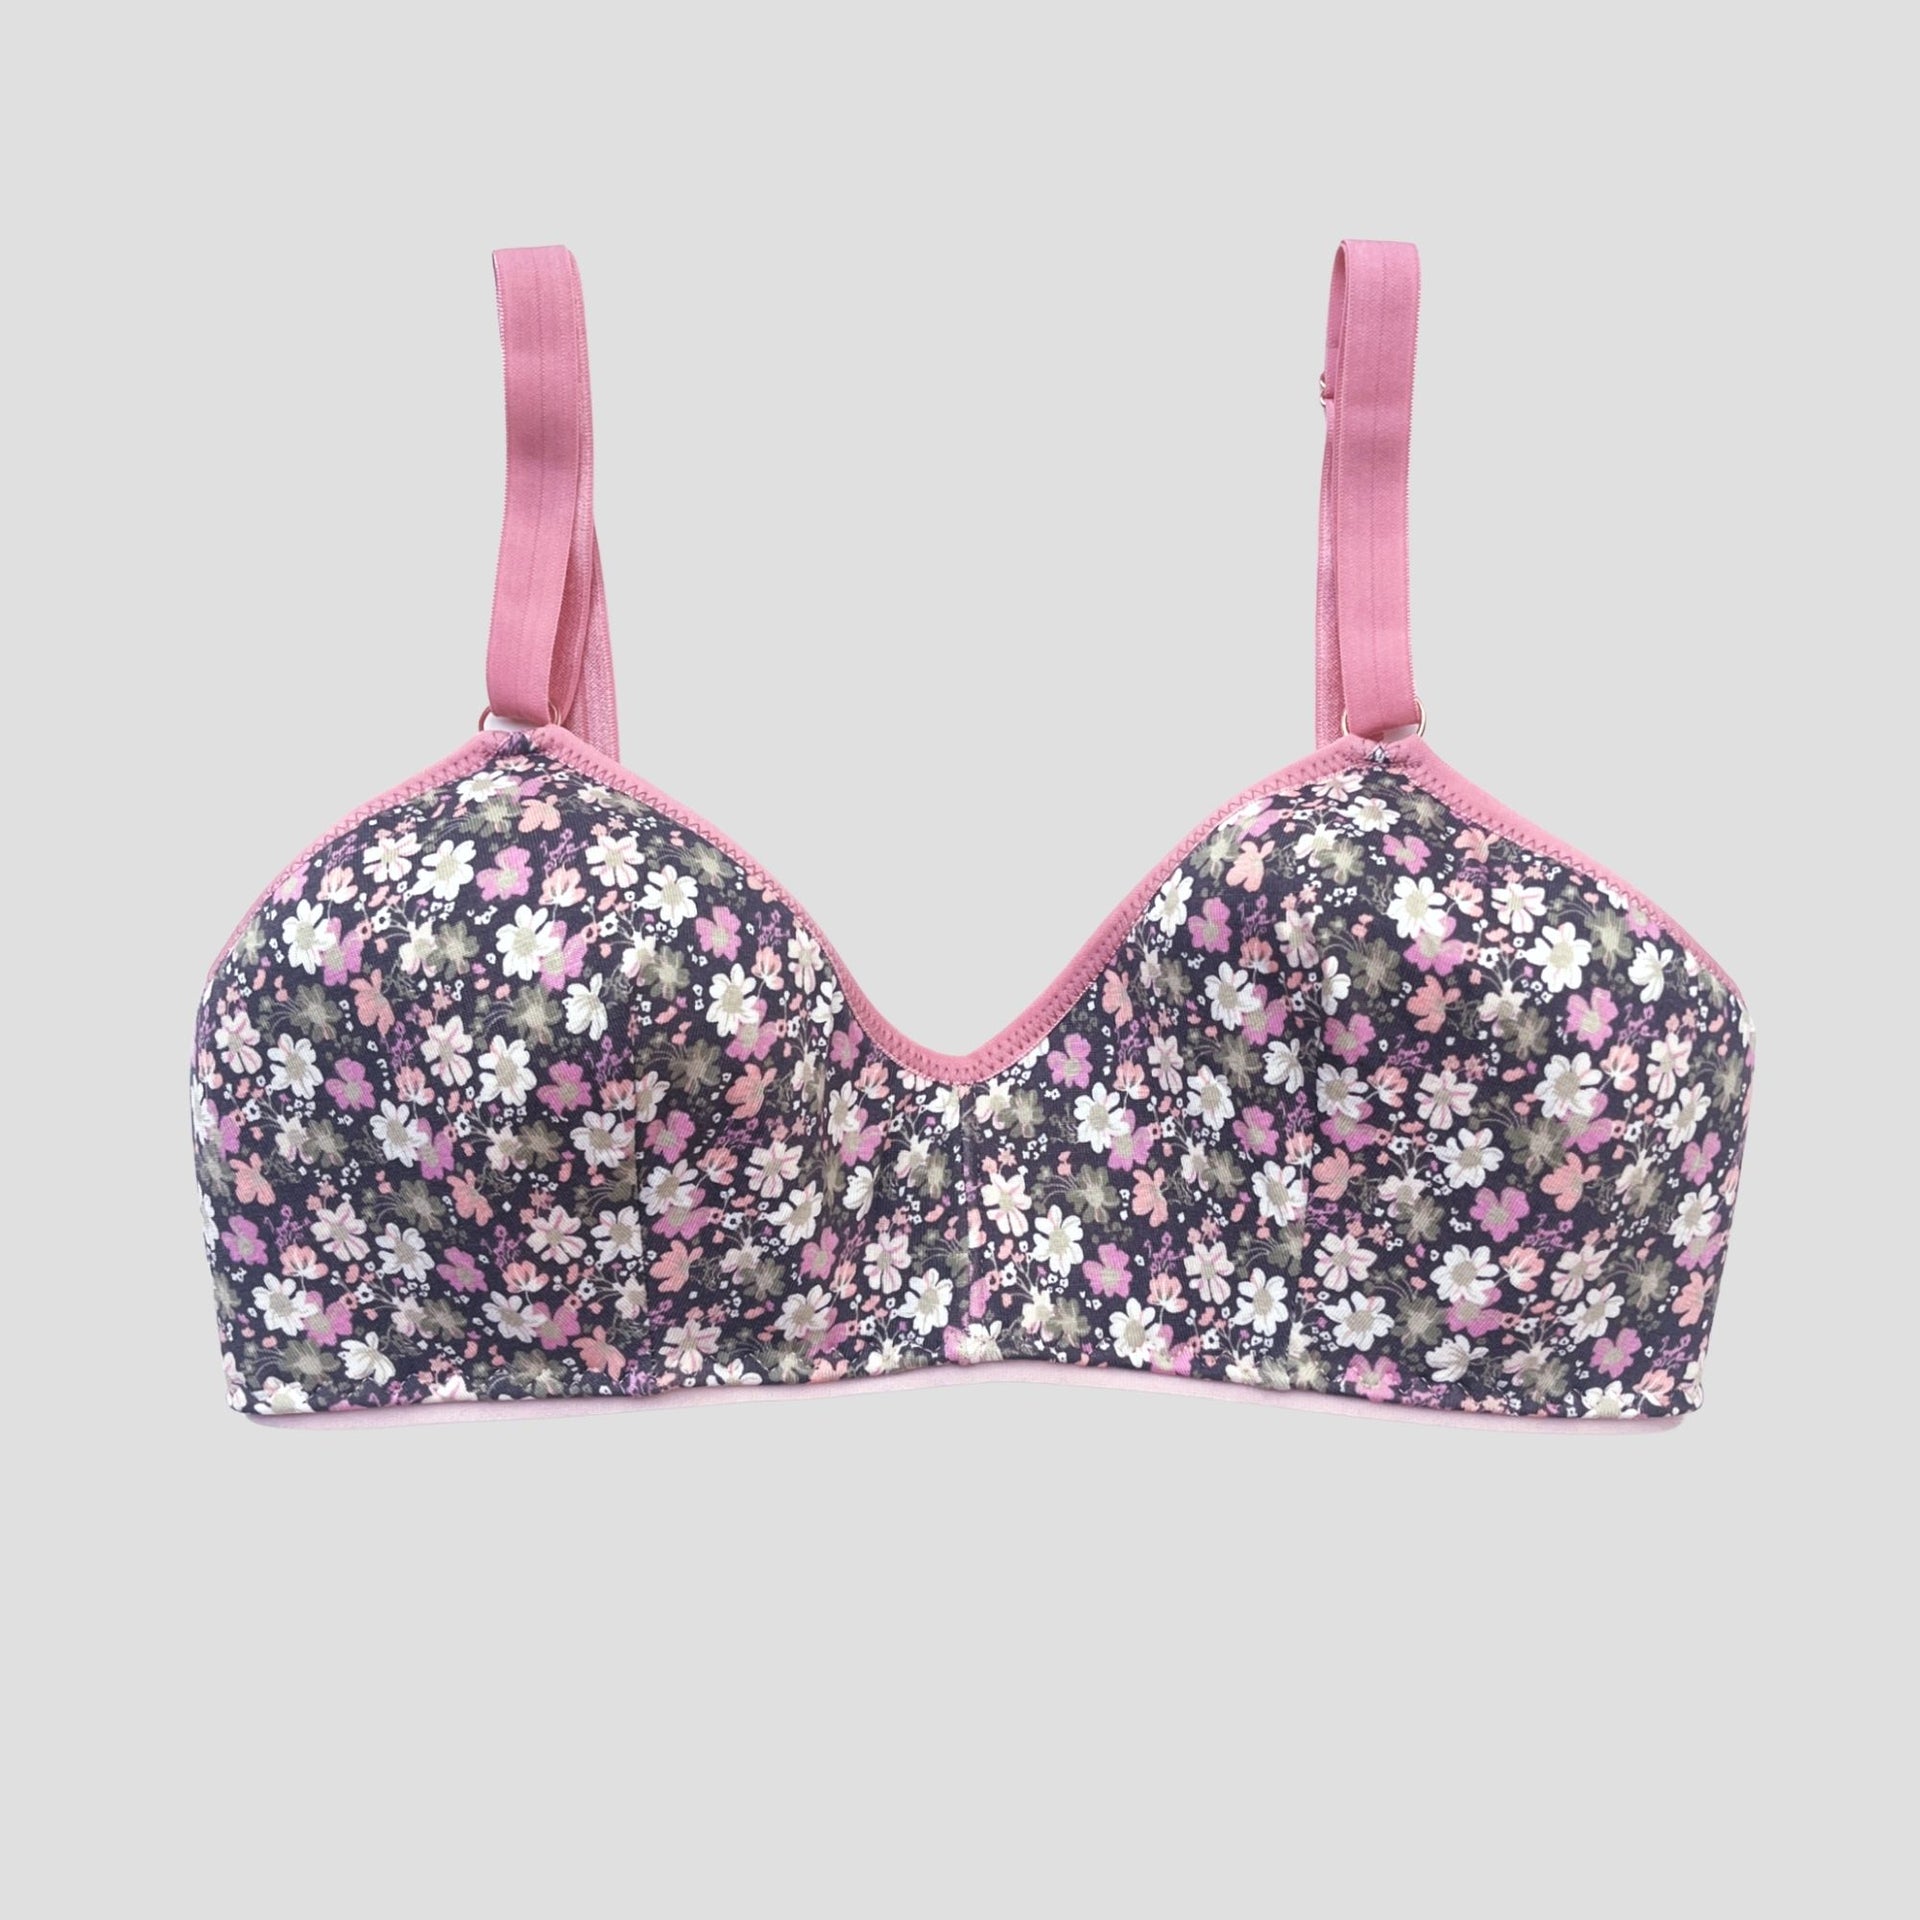 Women 36-44 B C Bras Chest Padded Floral Printed Breathable